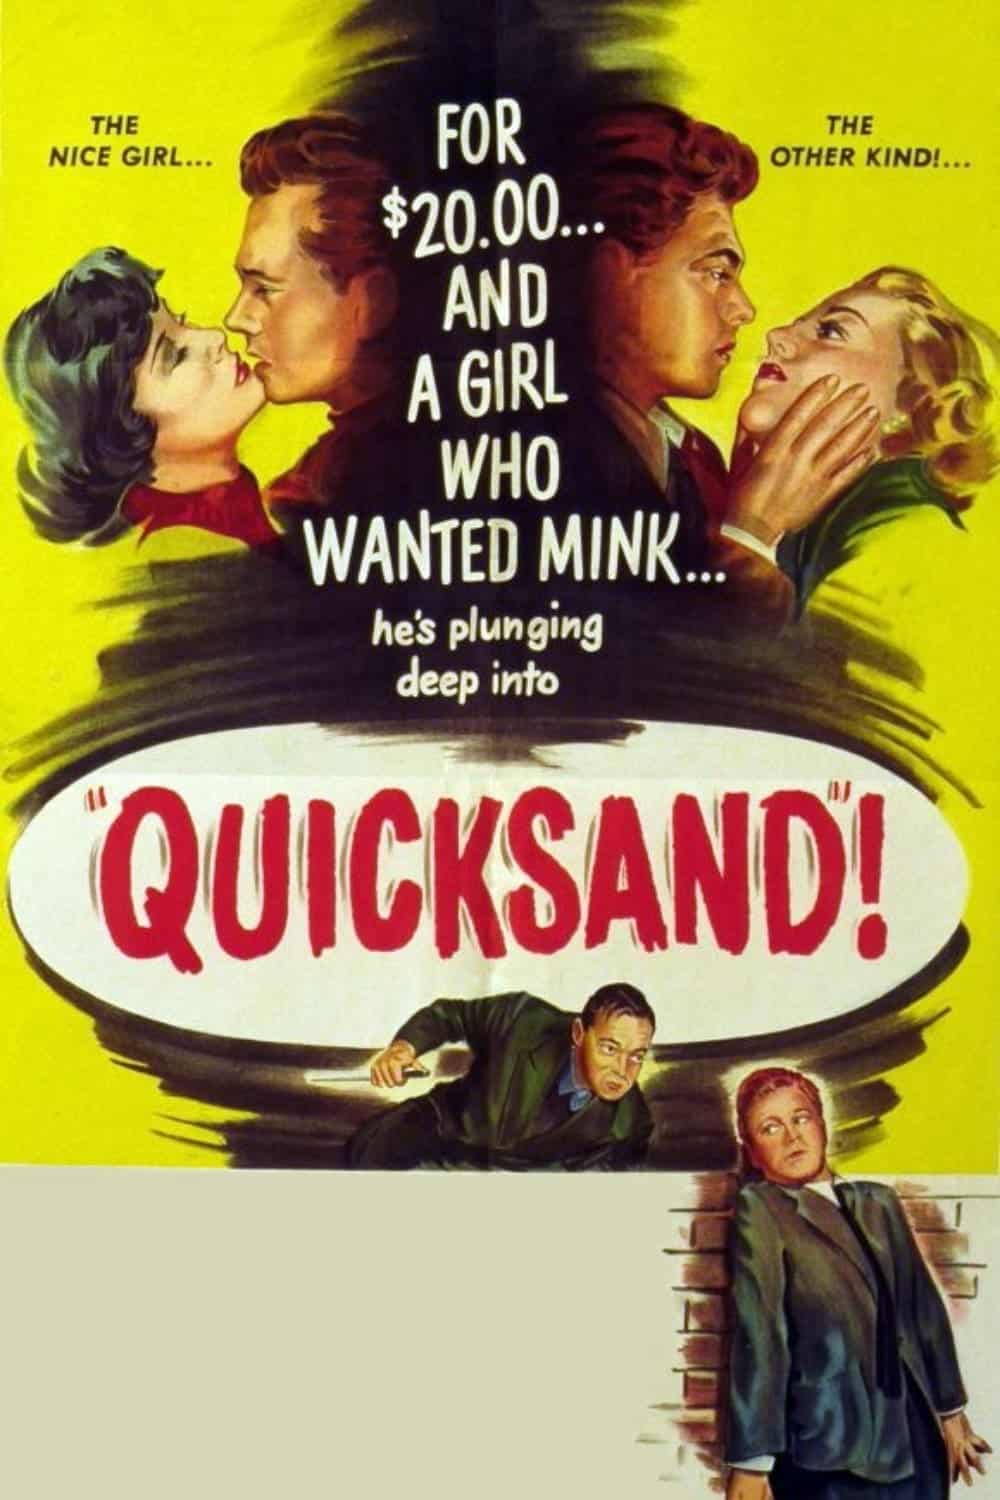 Poster for the movie "Quicksand"